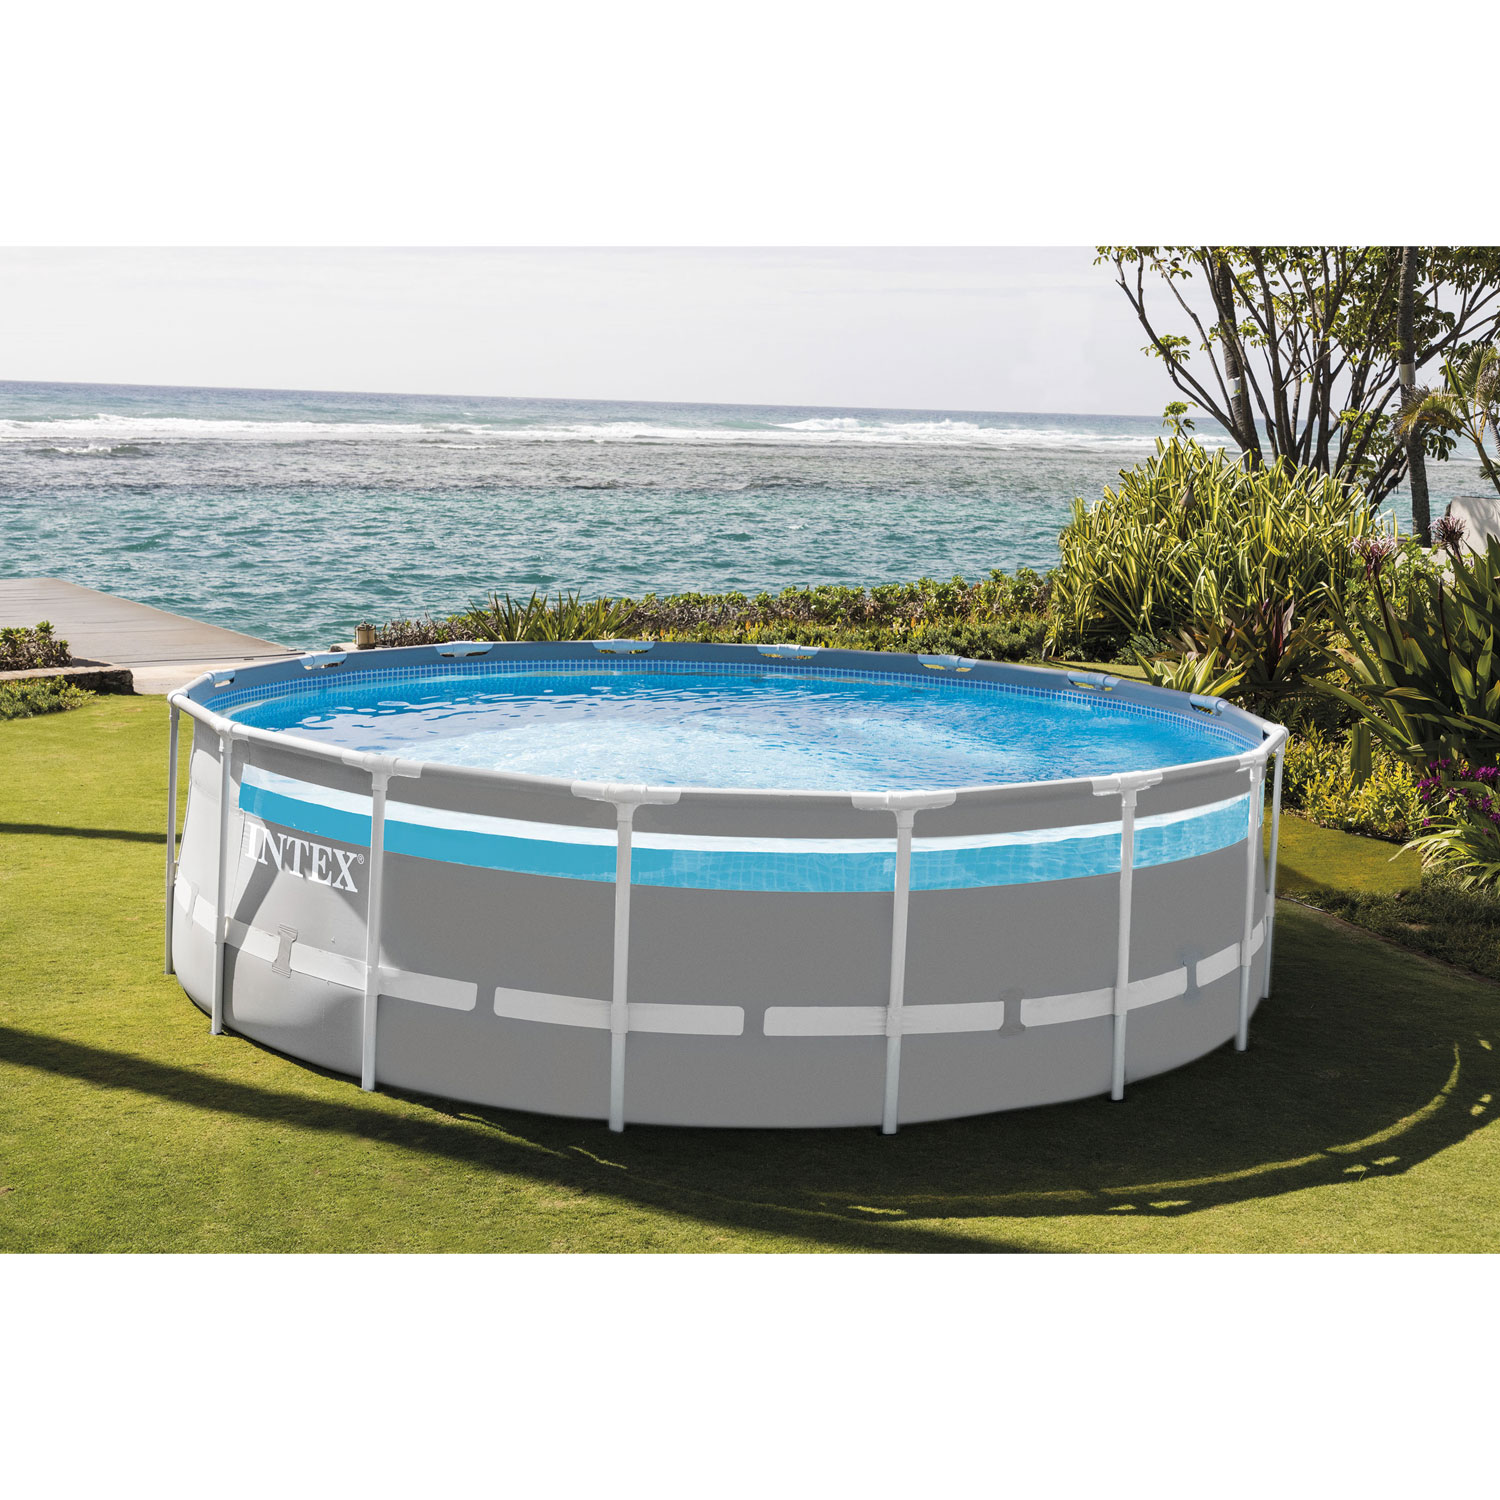 Intex 26729EH 16ft x 48in Clearview Prism Above Ground Swimming Pool w/Pump - image 4 of 13